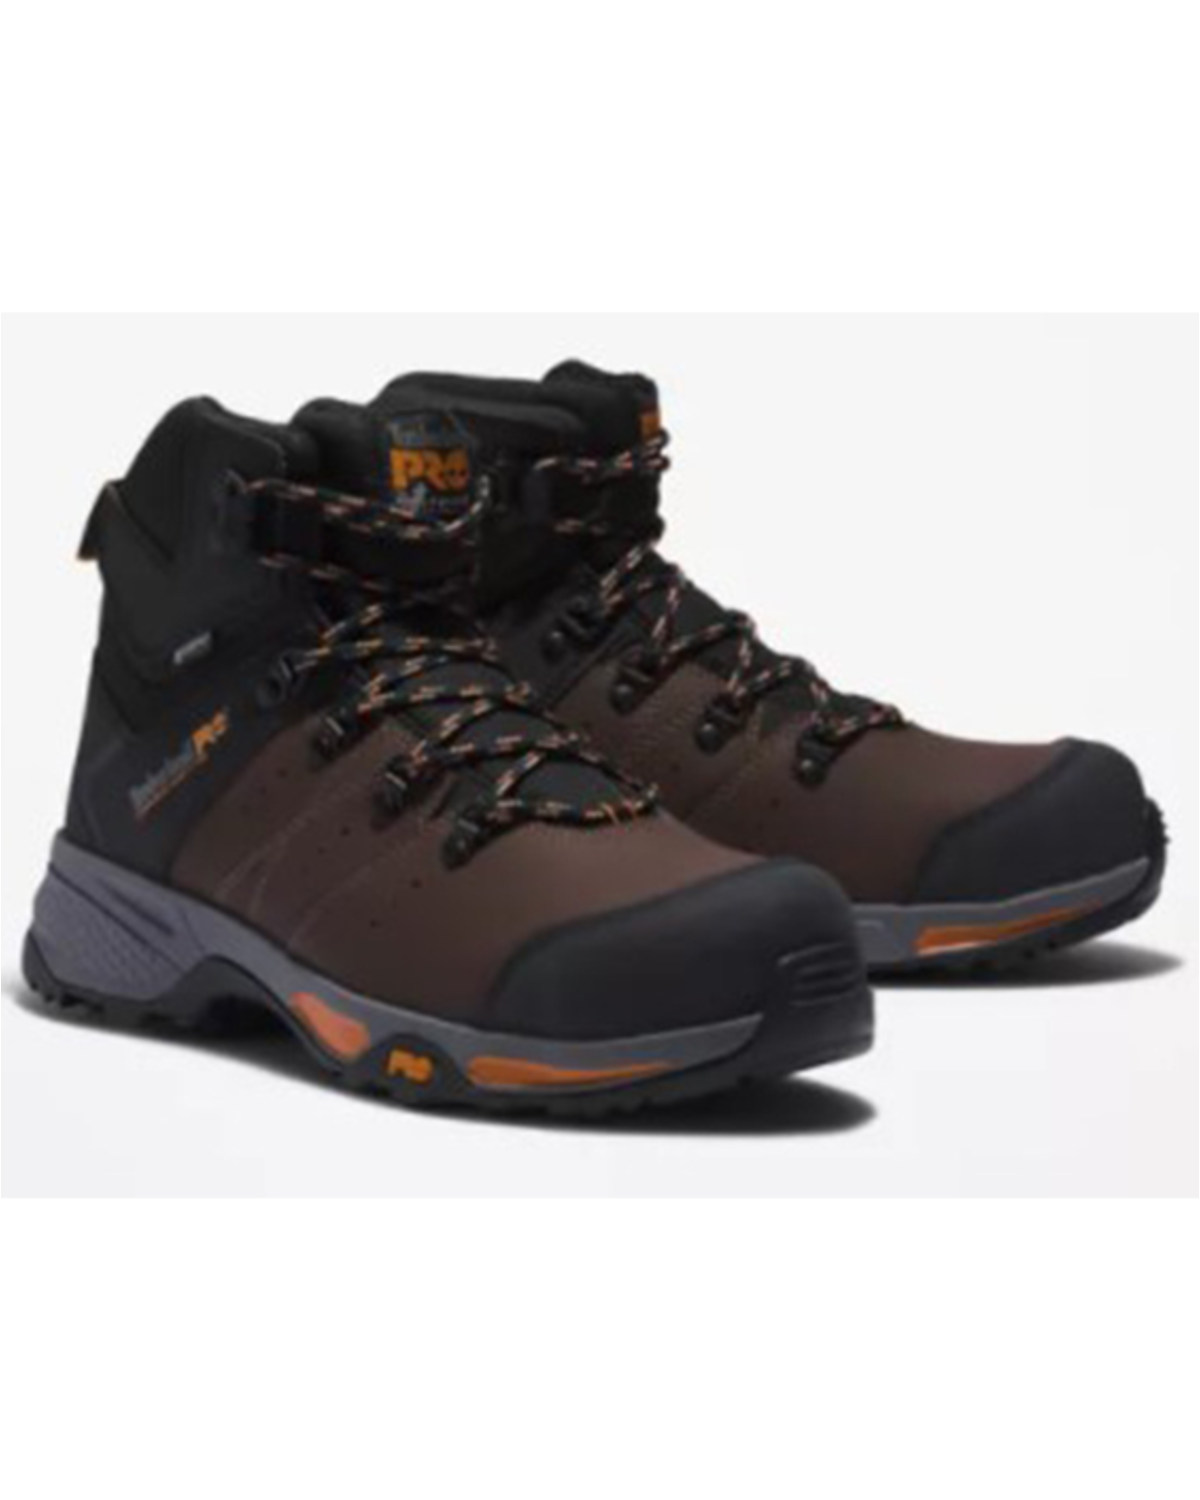 Timberland Men's Switchback Waterproof Lace-Up Hiking Work Boots - Composite Toe